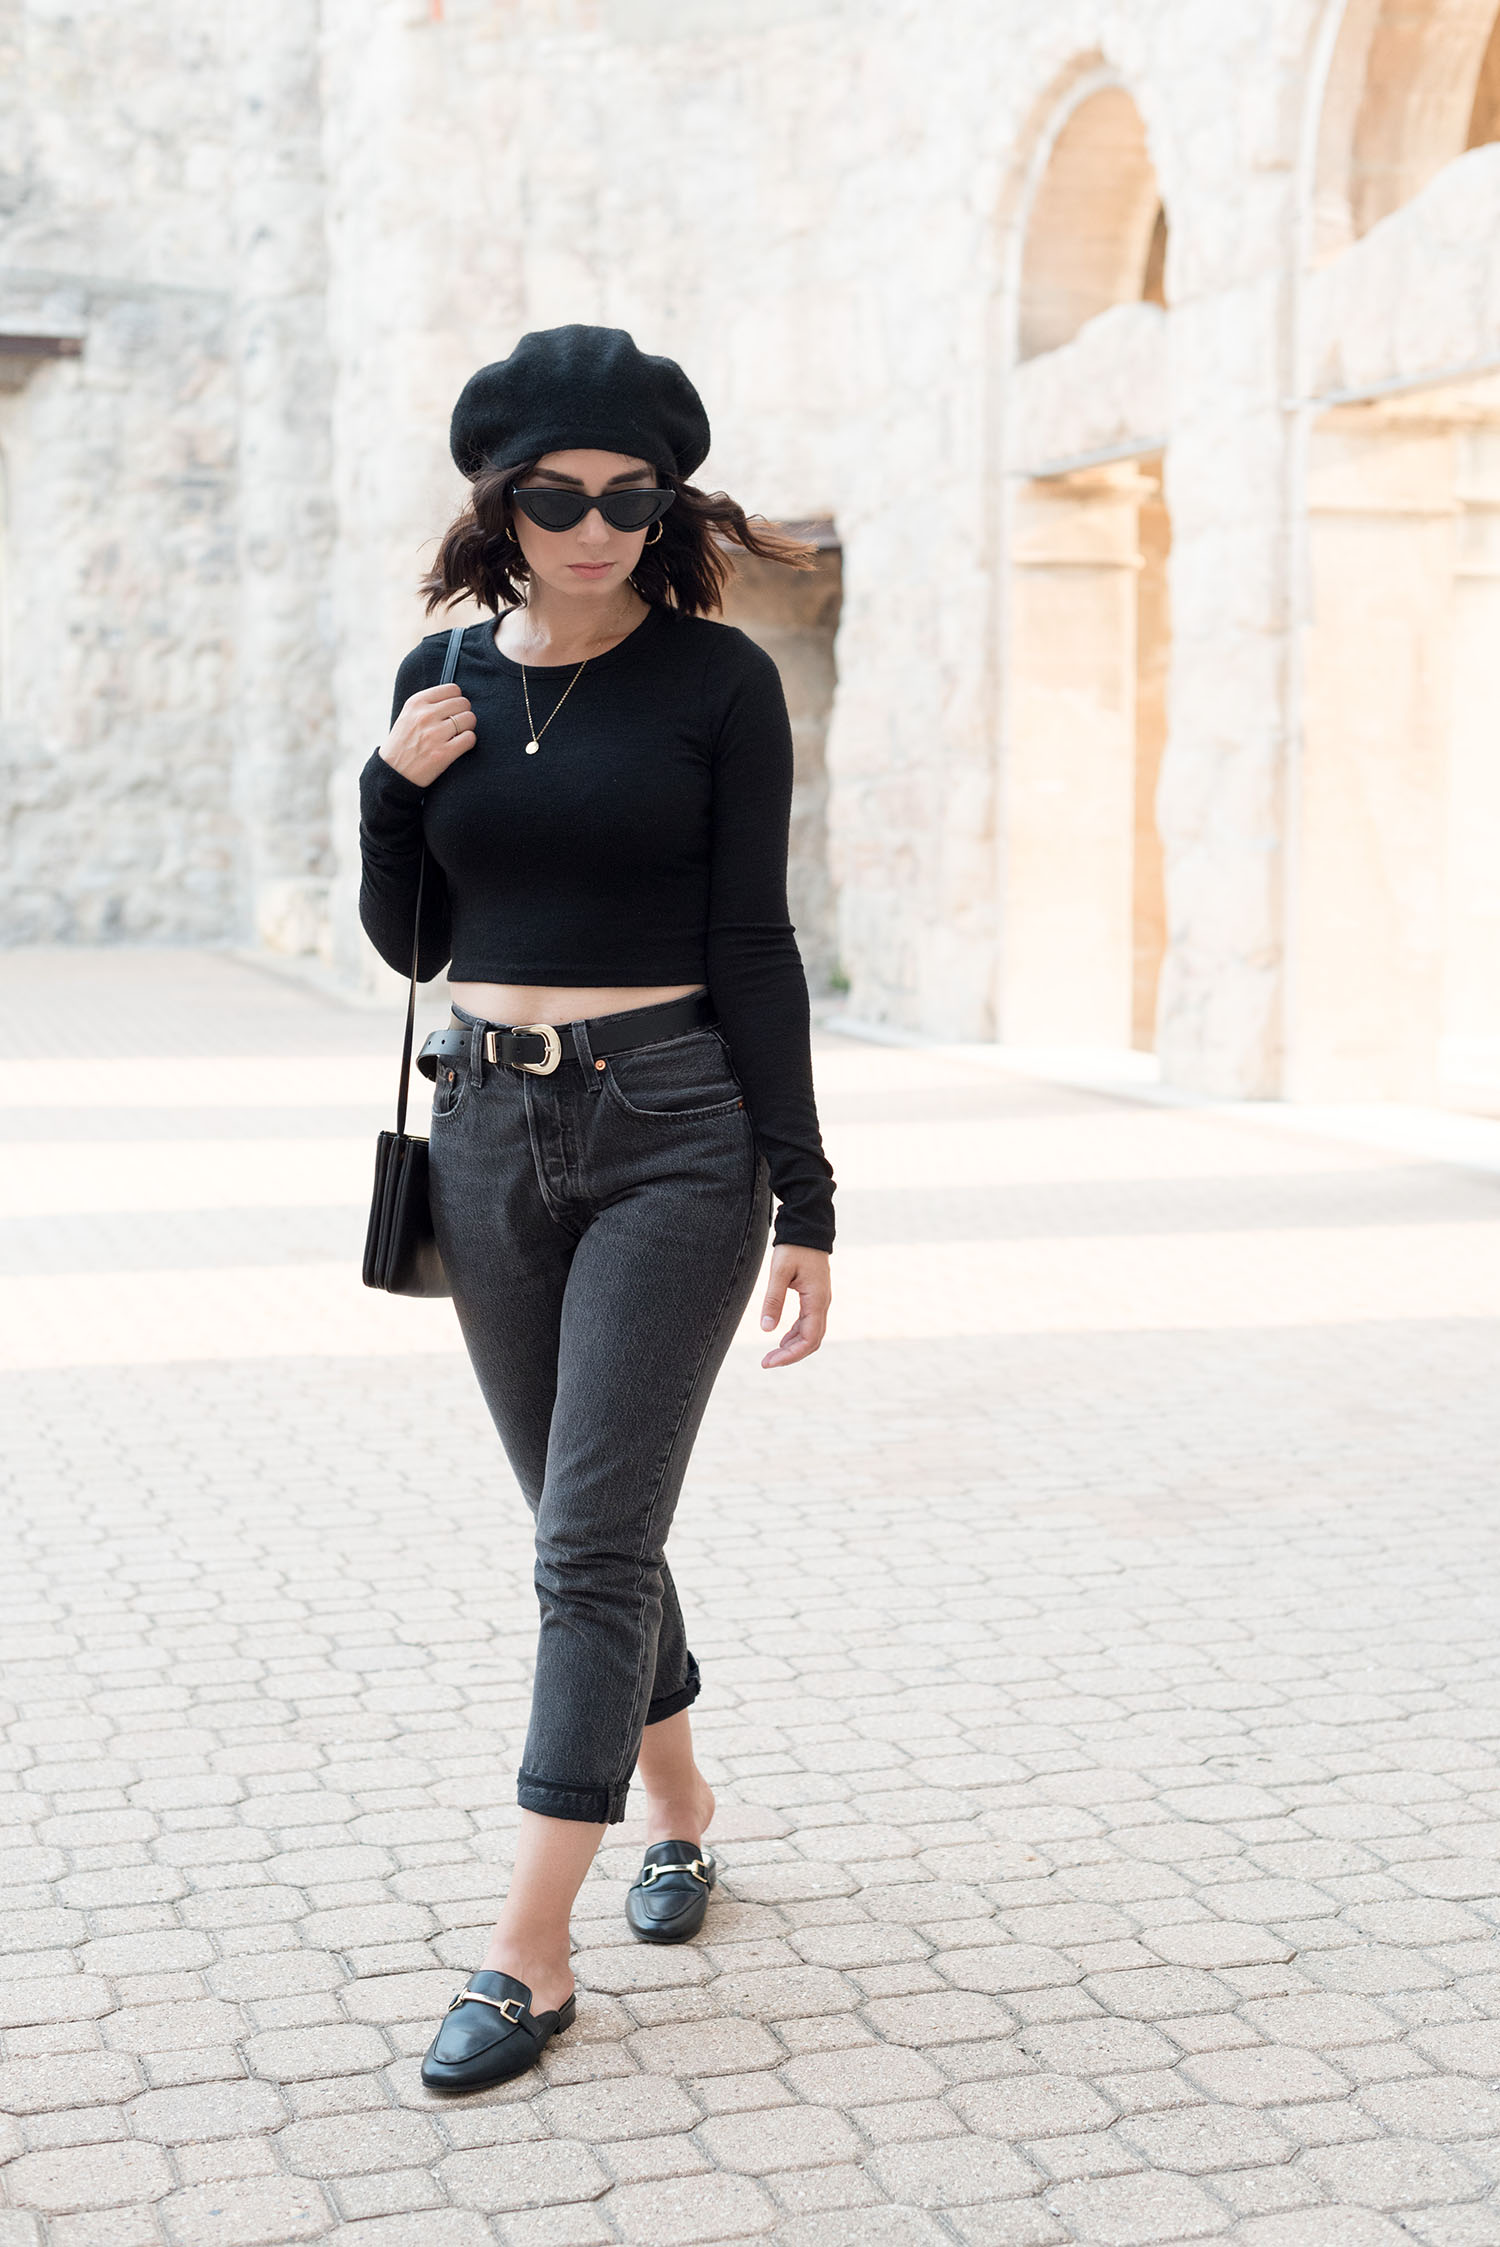 Top Winnipeg fashion blogger Cee Fardoe of Coco & Vera at St. Boniface Cathedral, wearing an Anthropologie Bonnie beret and carrying a Celine trio bag